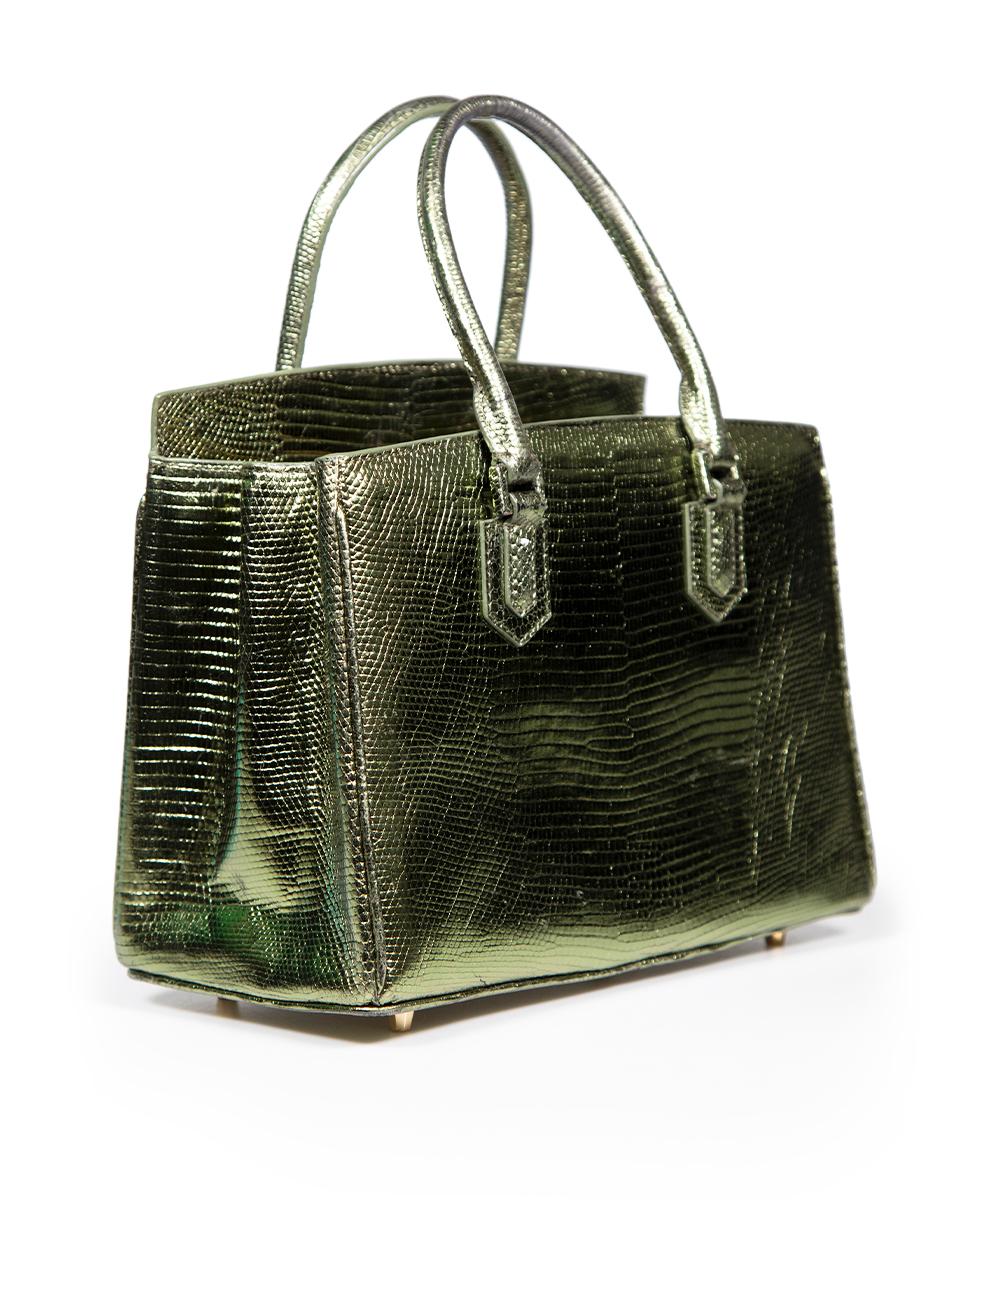 CONDITION is Very good. Minimal wear to bag is evident. Minimal wear to the base corners, top handle and trims with light discolouration to the lizard leather this used Ethan K designer resale item.
 
 
 
 Details
 
 
 Green
 
 Lizard leather
 
